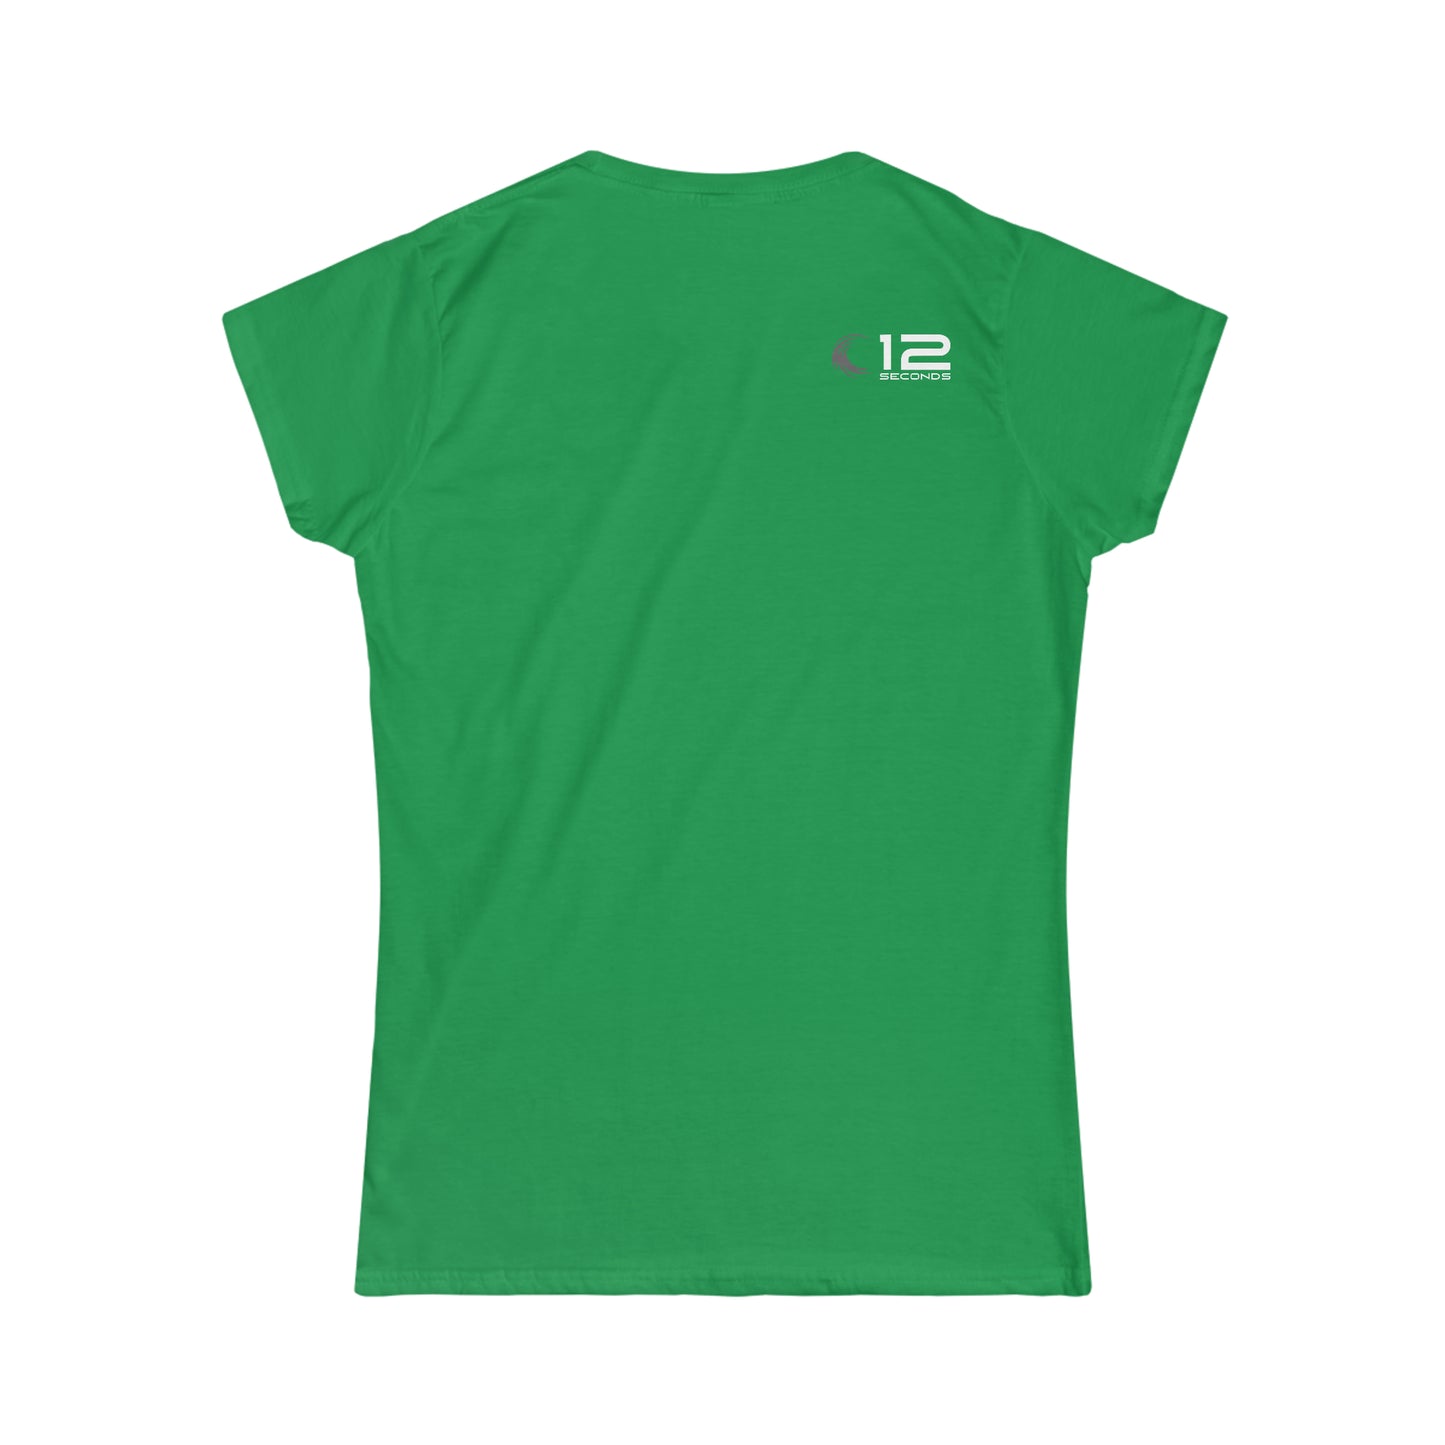 Women's Softstyle Tee - CHEETAH - 12 SECONDS APPAREL